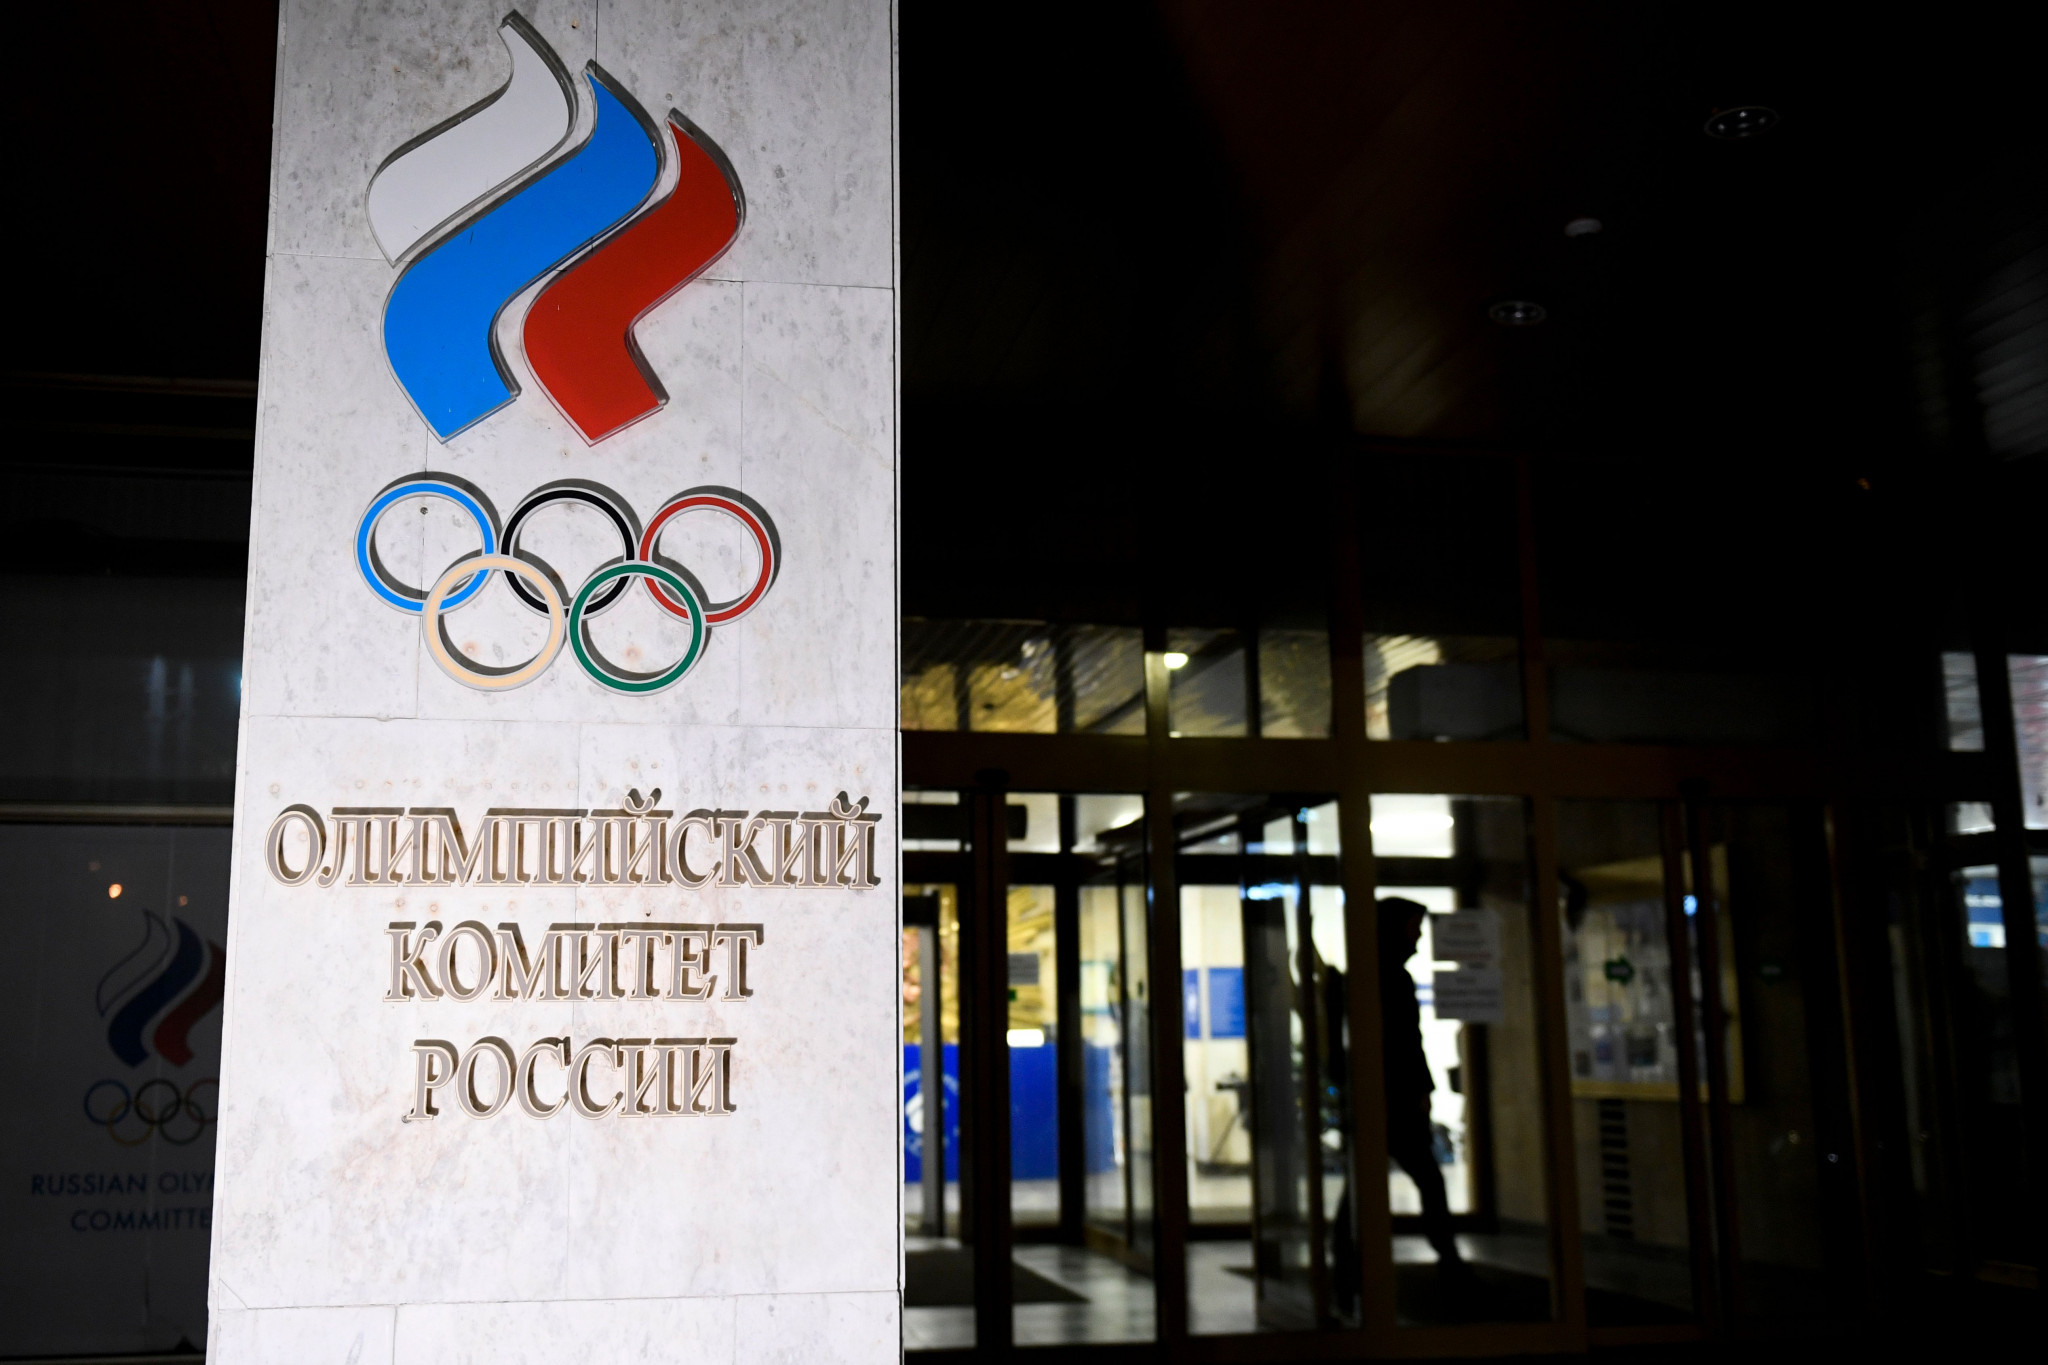 René Fasel believes politics could be the reason behind the recent decisions by the World Anti-Doing Agency on a string of proposed sanctions against Russian sports ©Getty Images